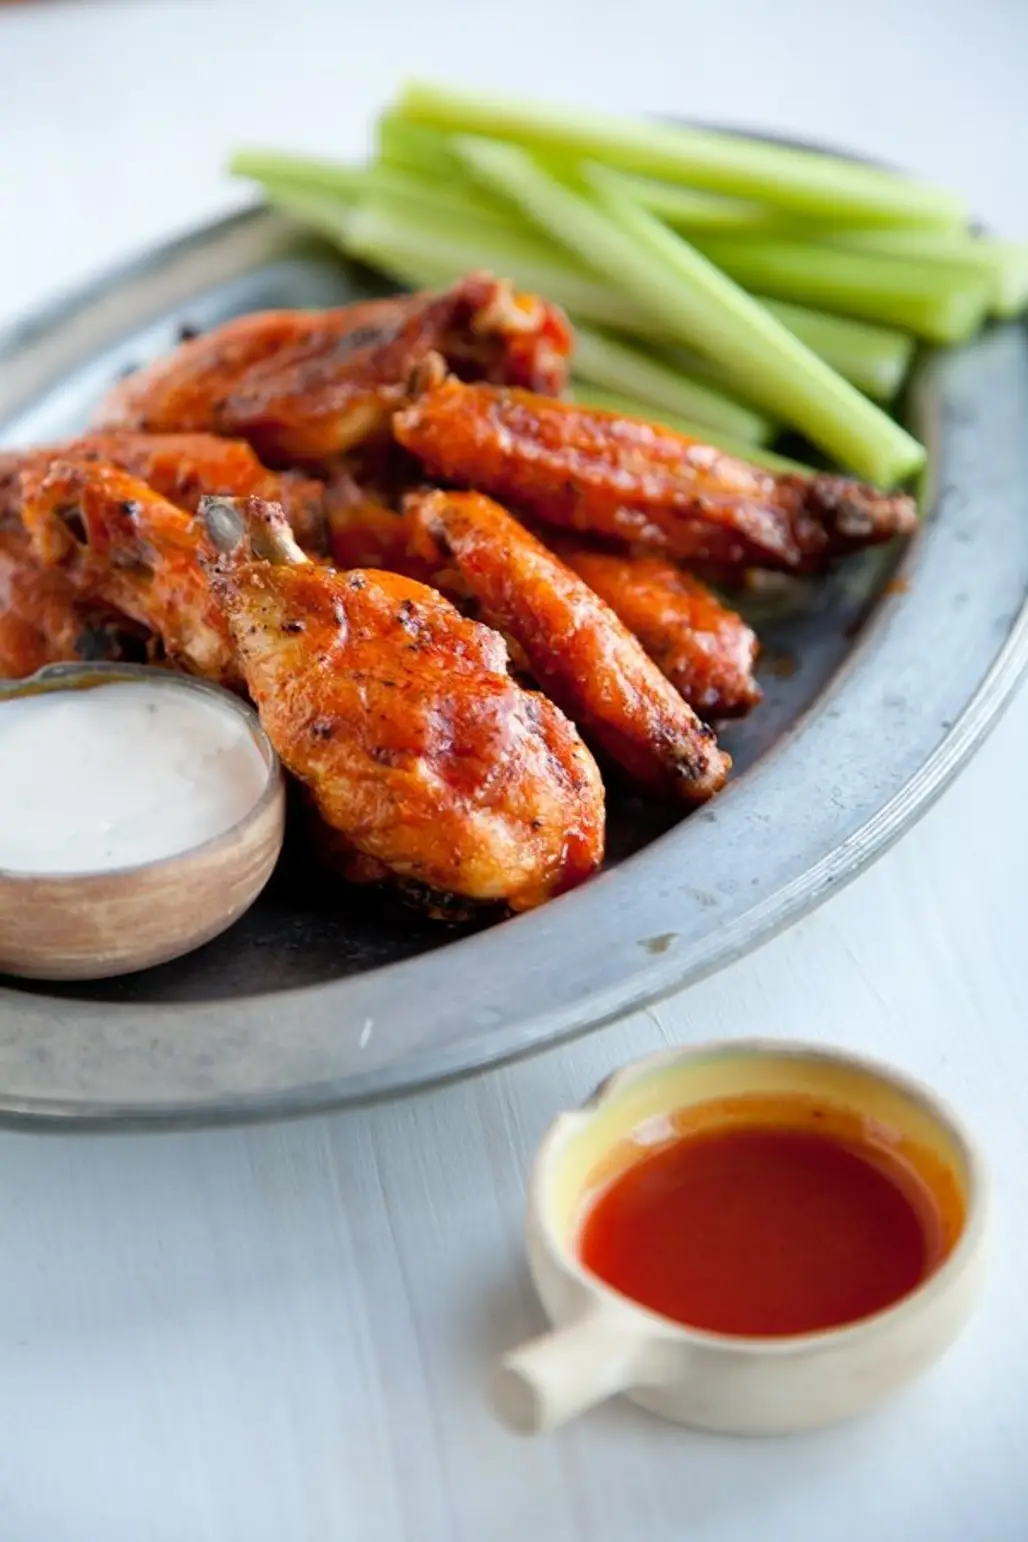 Hooter’s Hot Wing Sauce